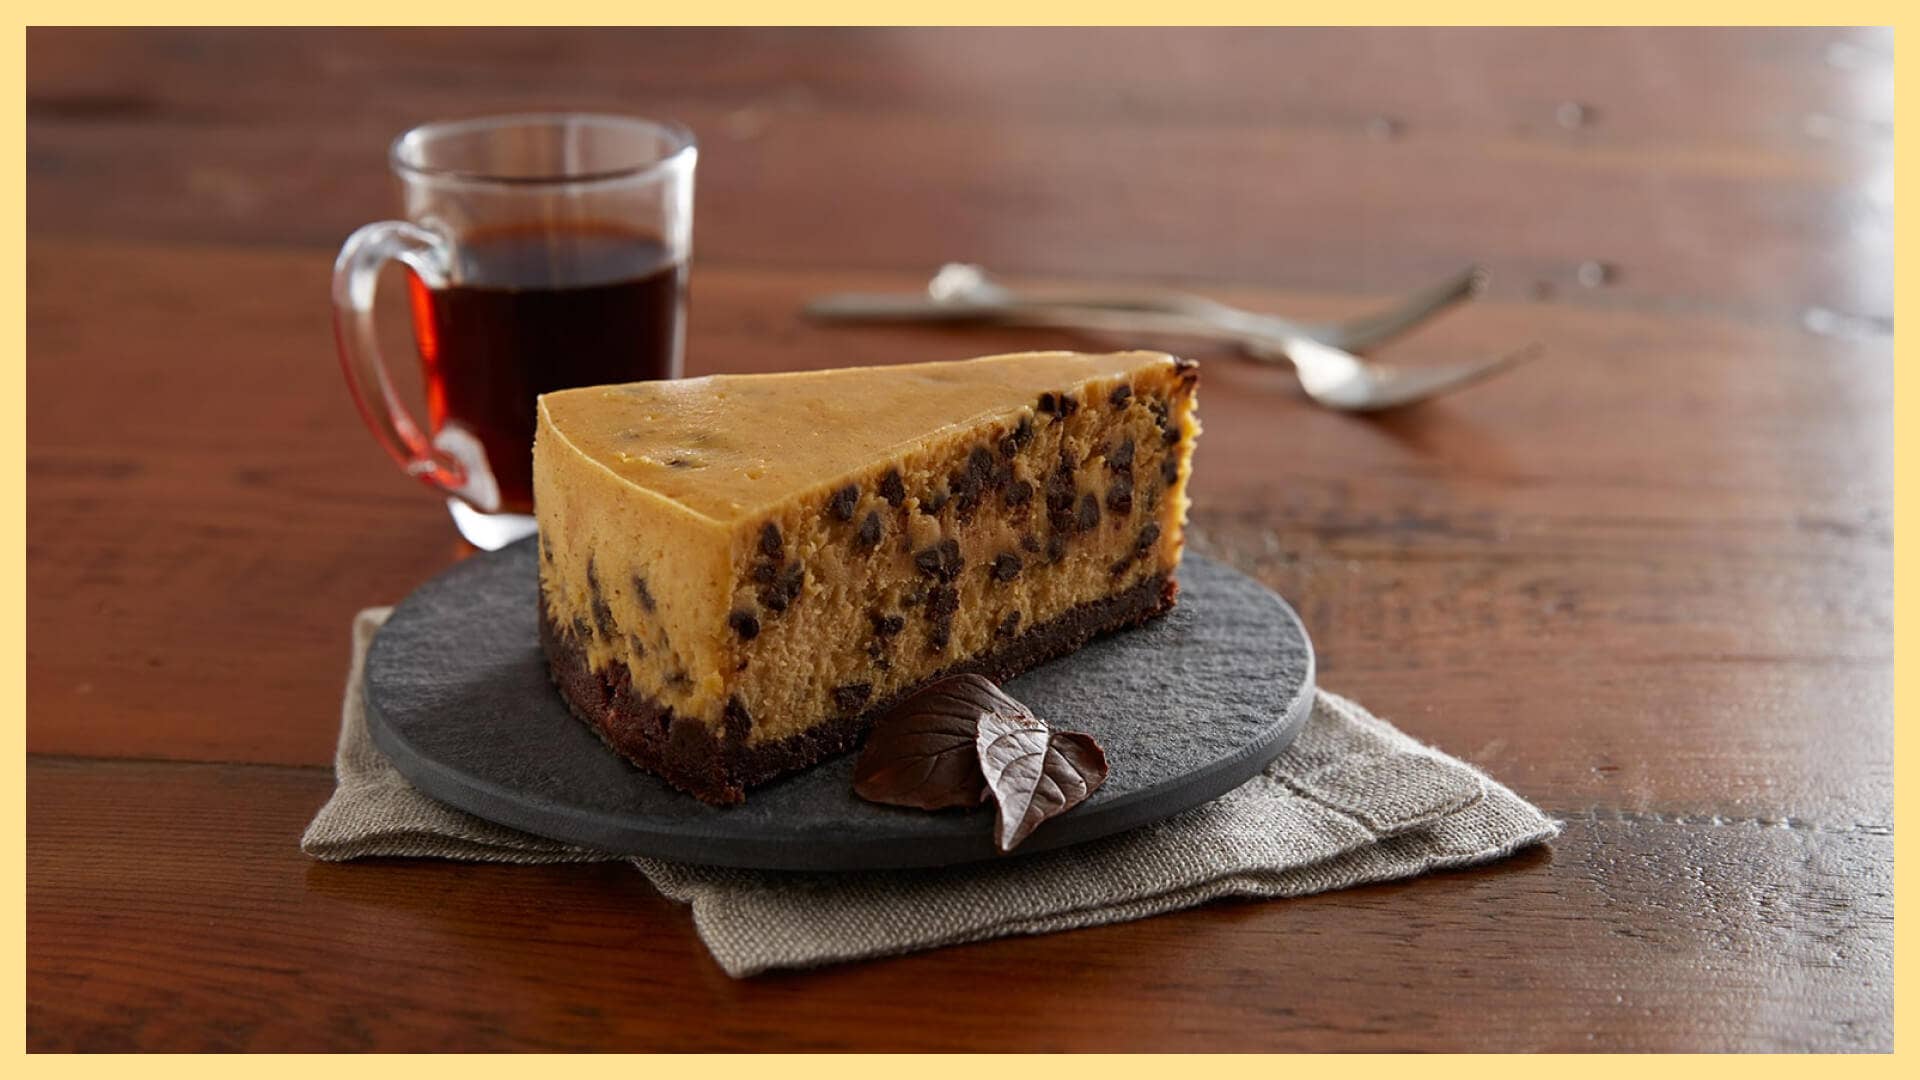 slice of chocolate chip pumpkin cheesecake with a mug of coffee and garnished with chocolate leaves